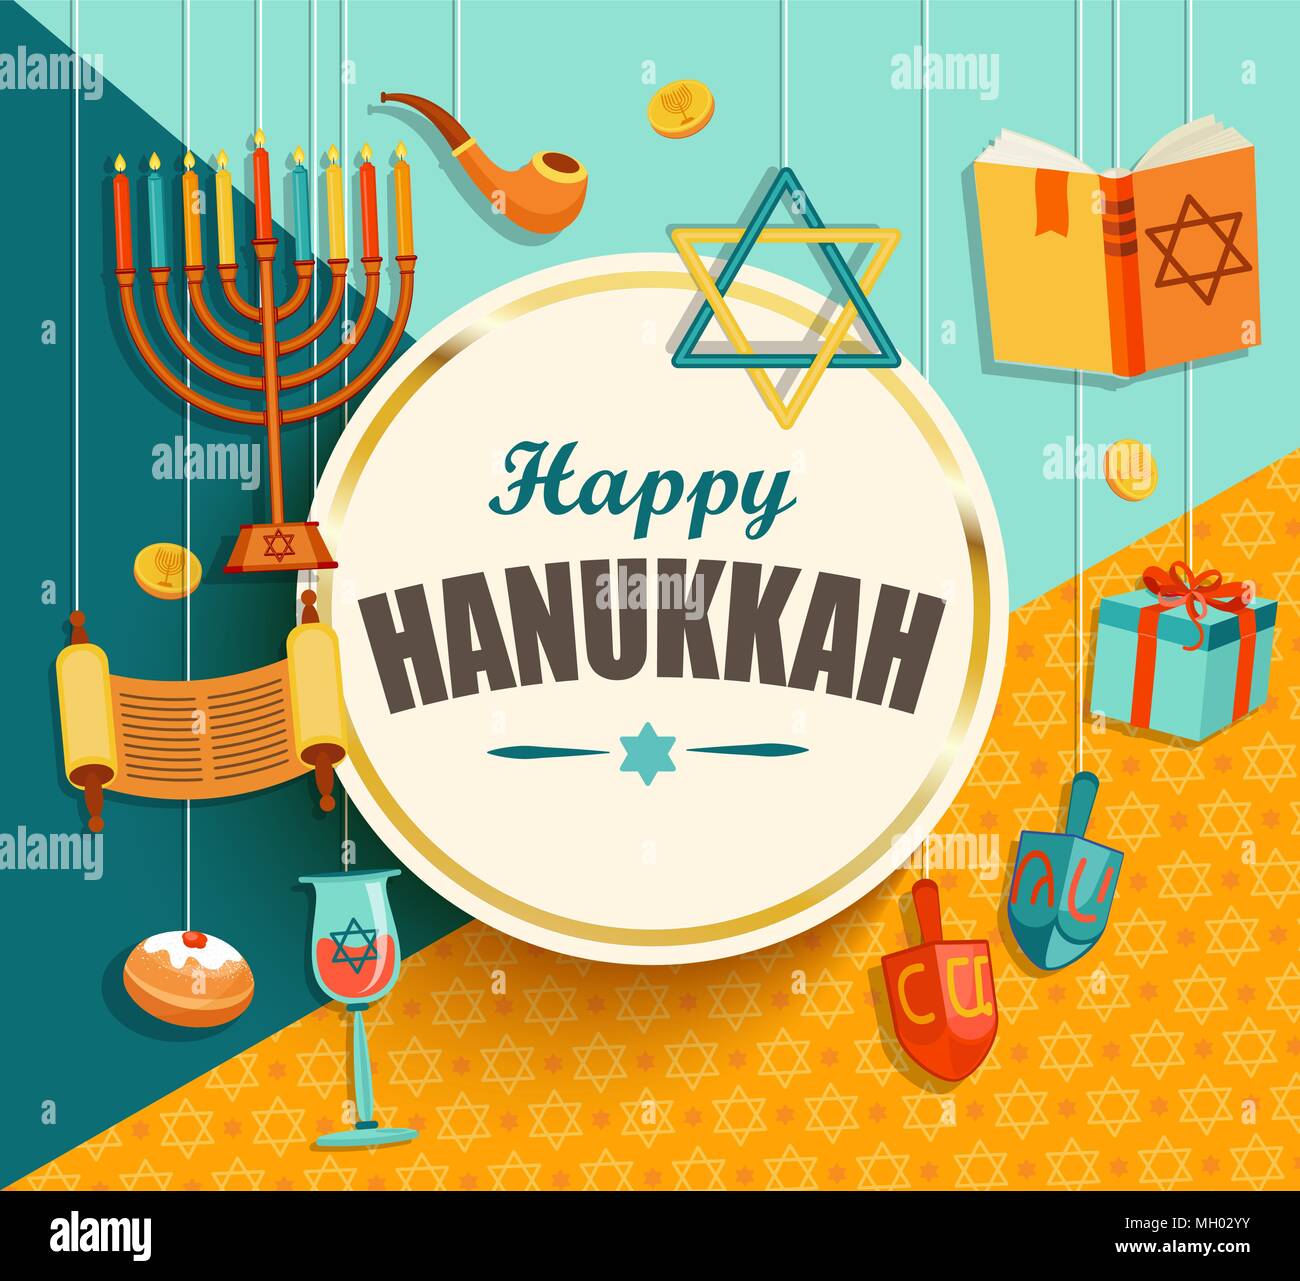 Hanukkah card with golden frame on geometric background with different hanukkah symbols. Vector illustration. Stock Vector